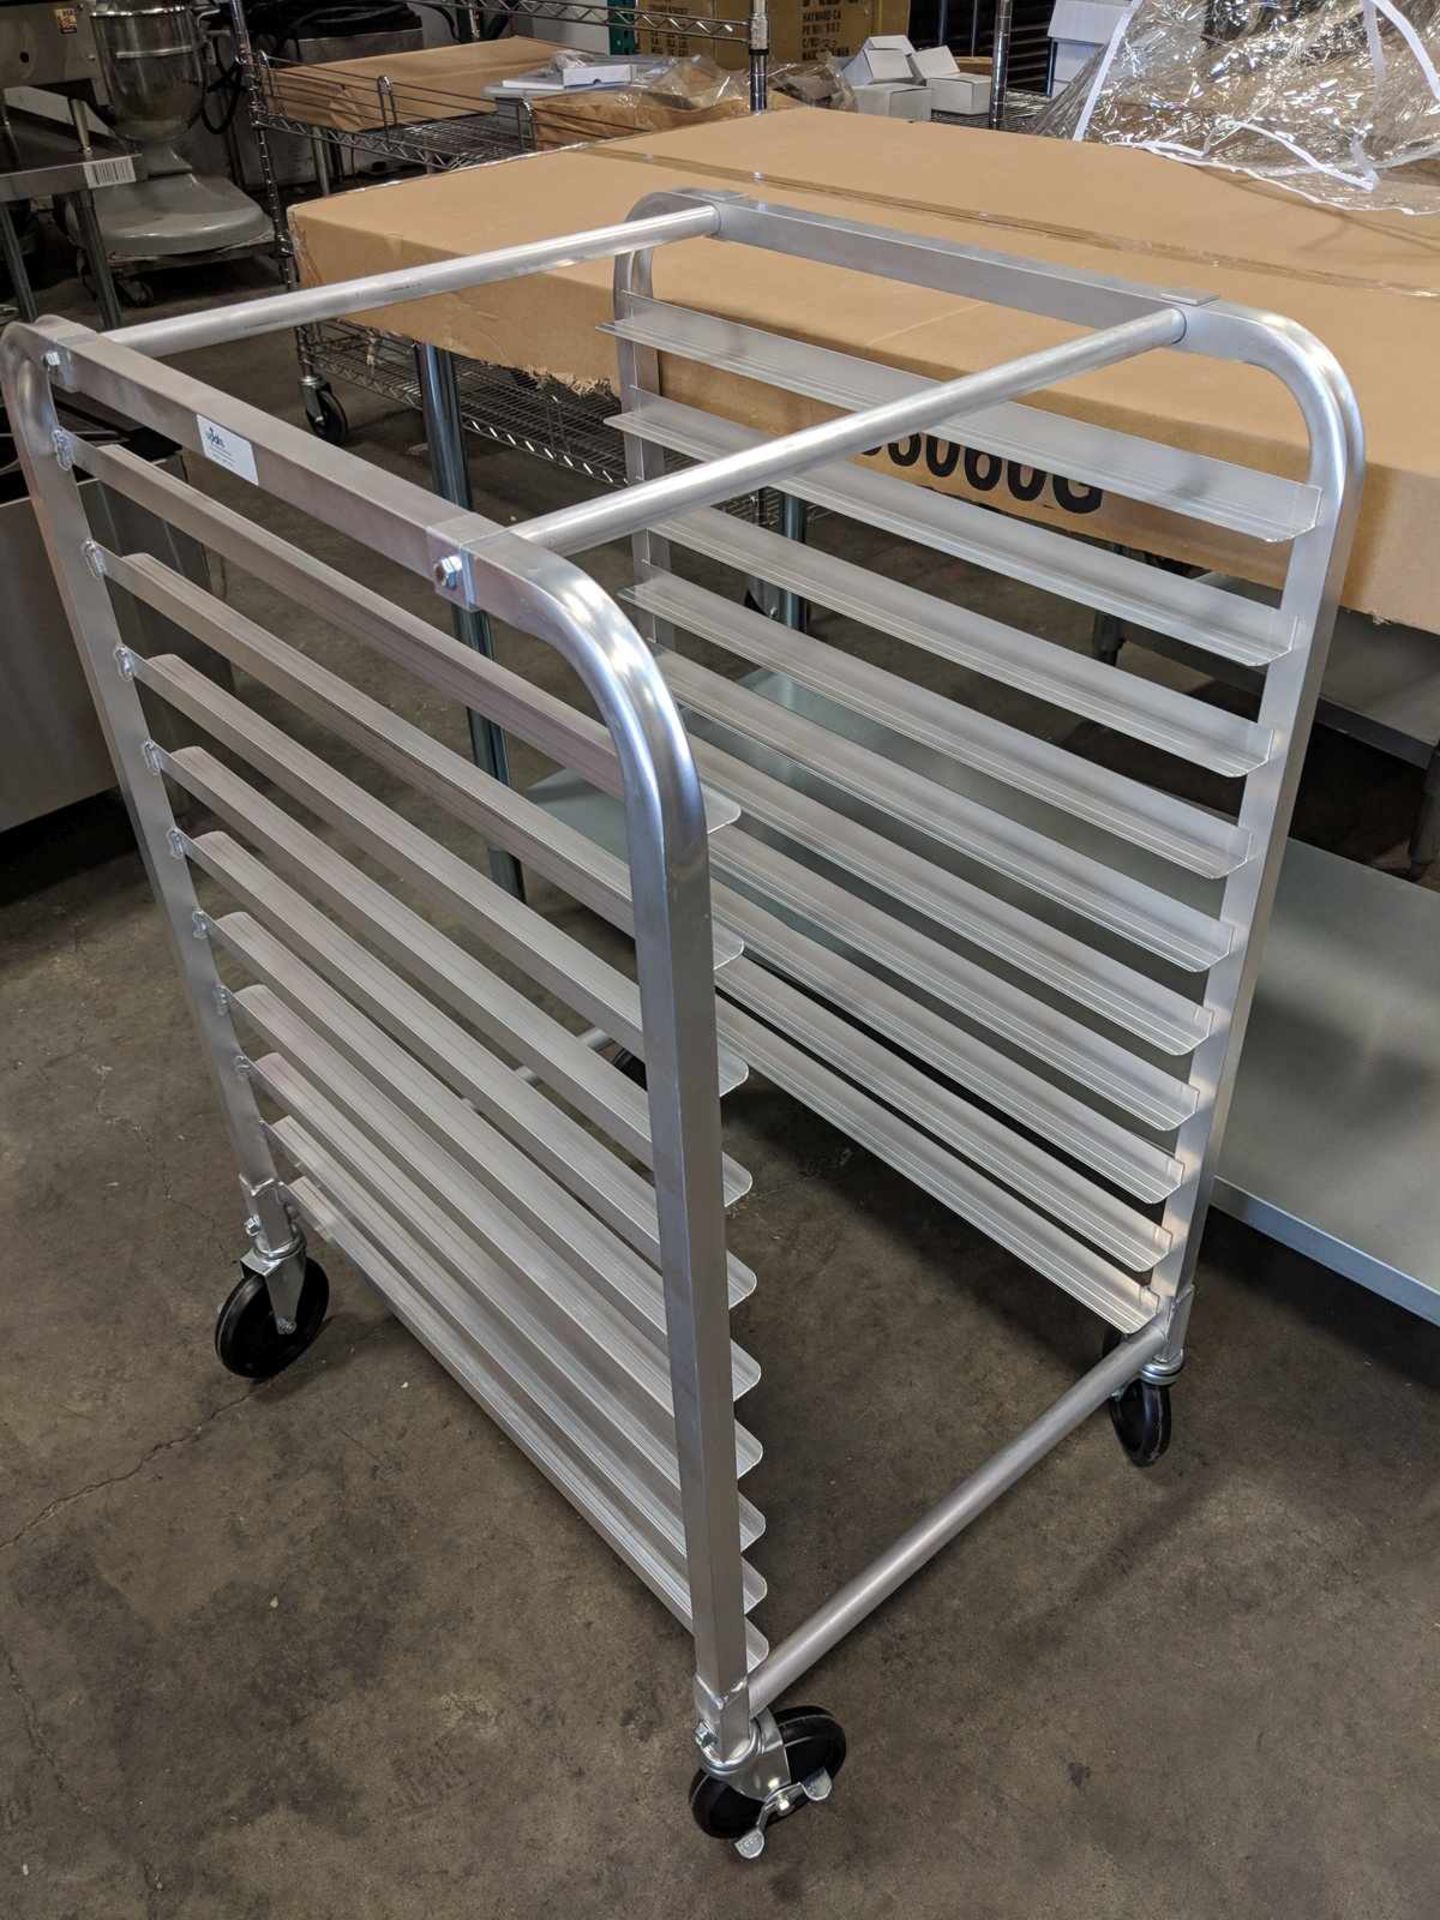 10 Aluminum Bun Pan Rack with Cover, includes 5 pans - Image 3 of 3